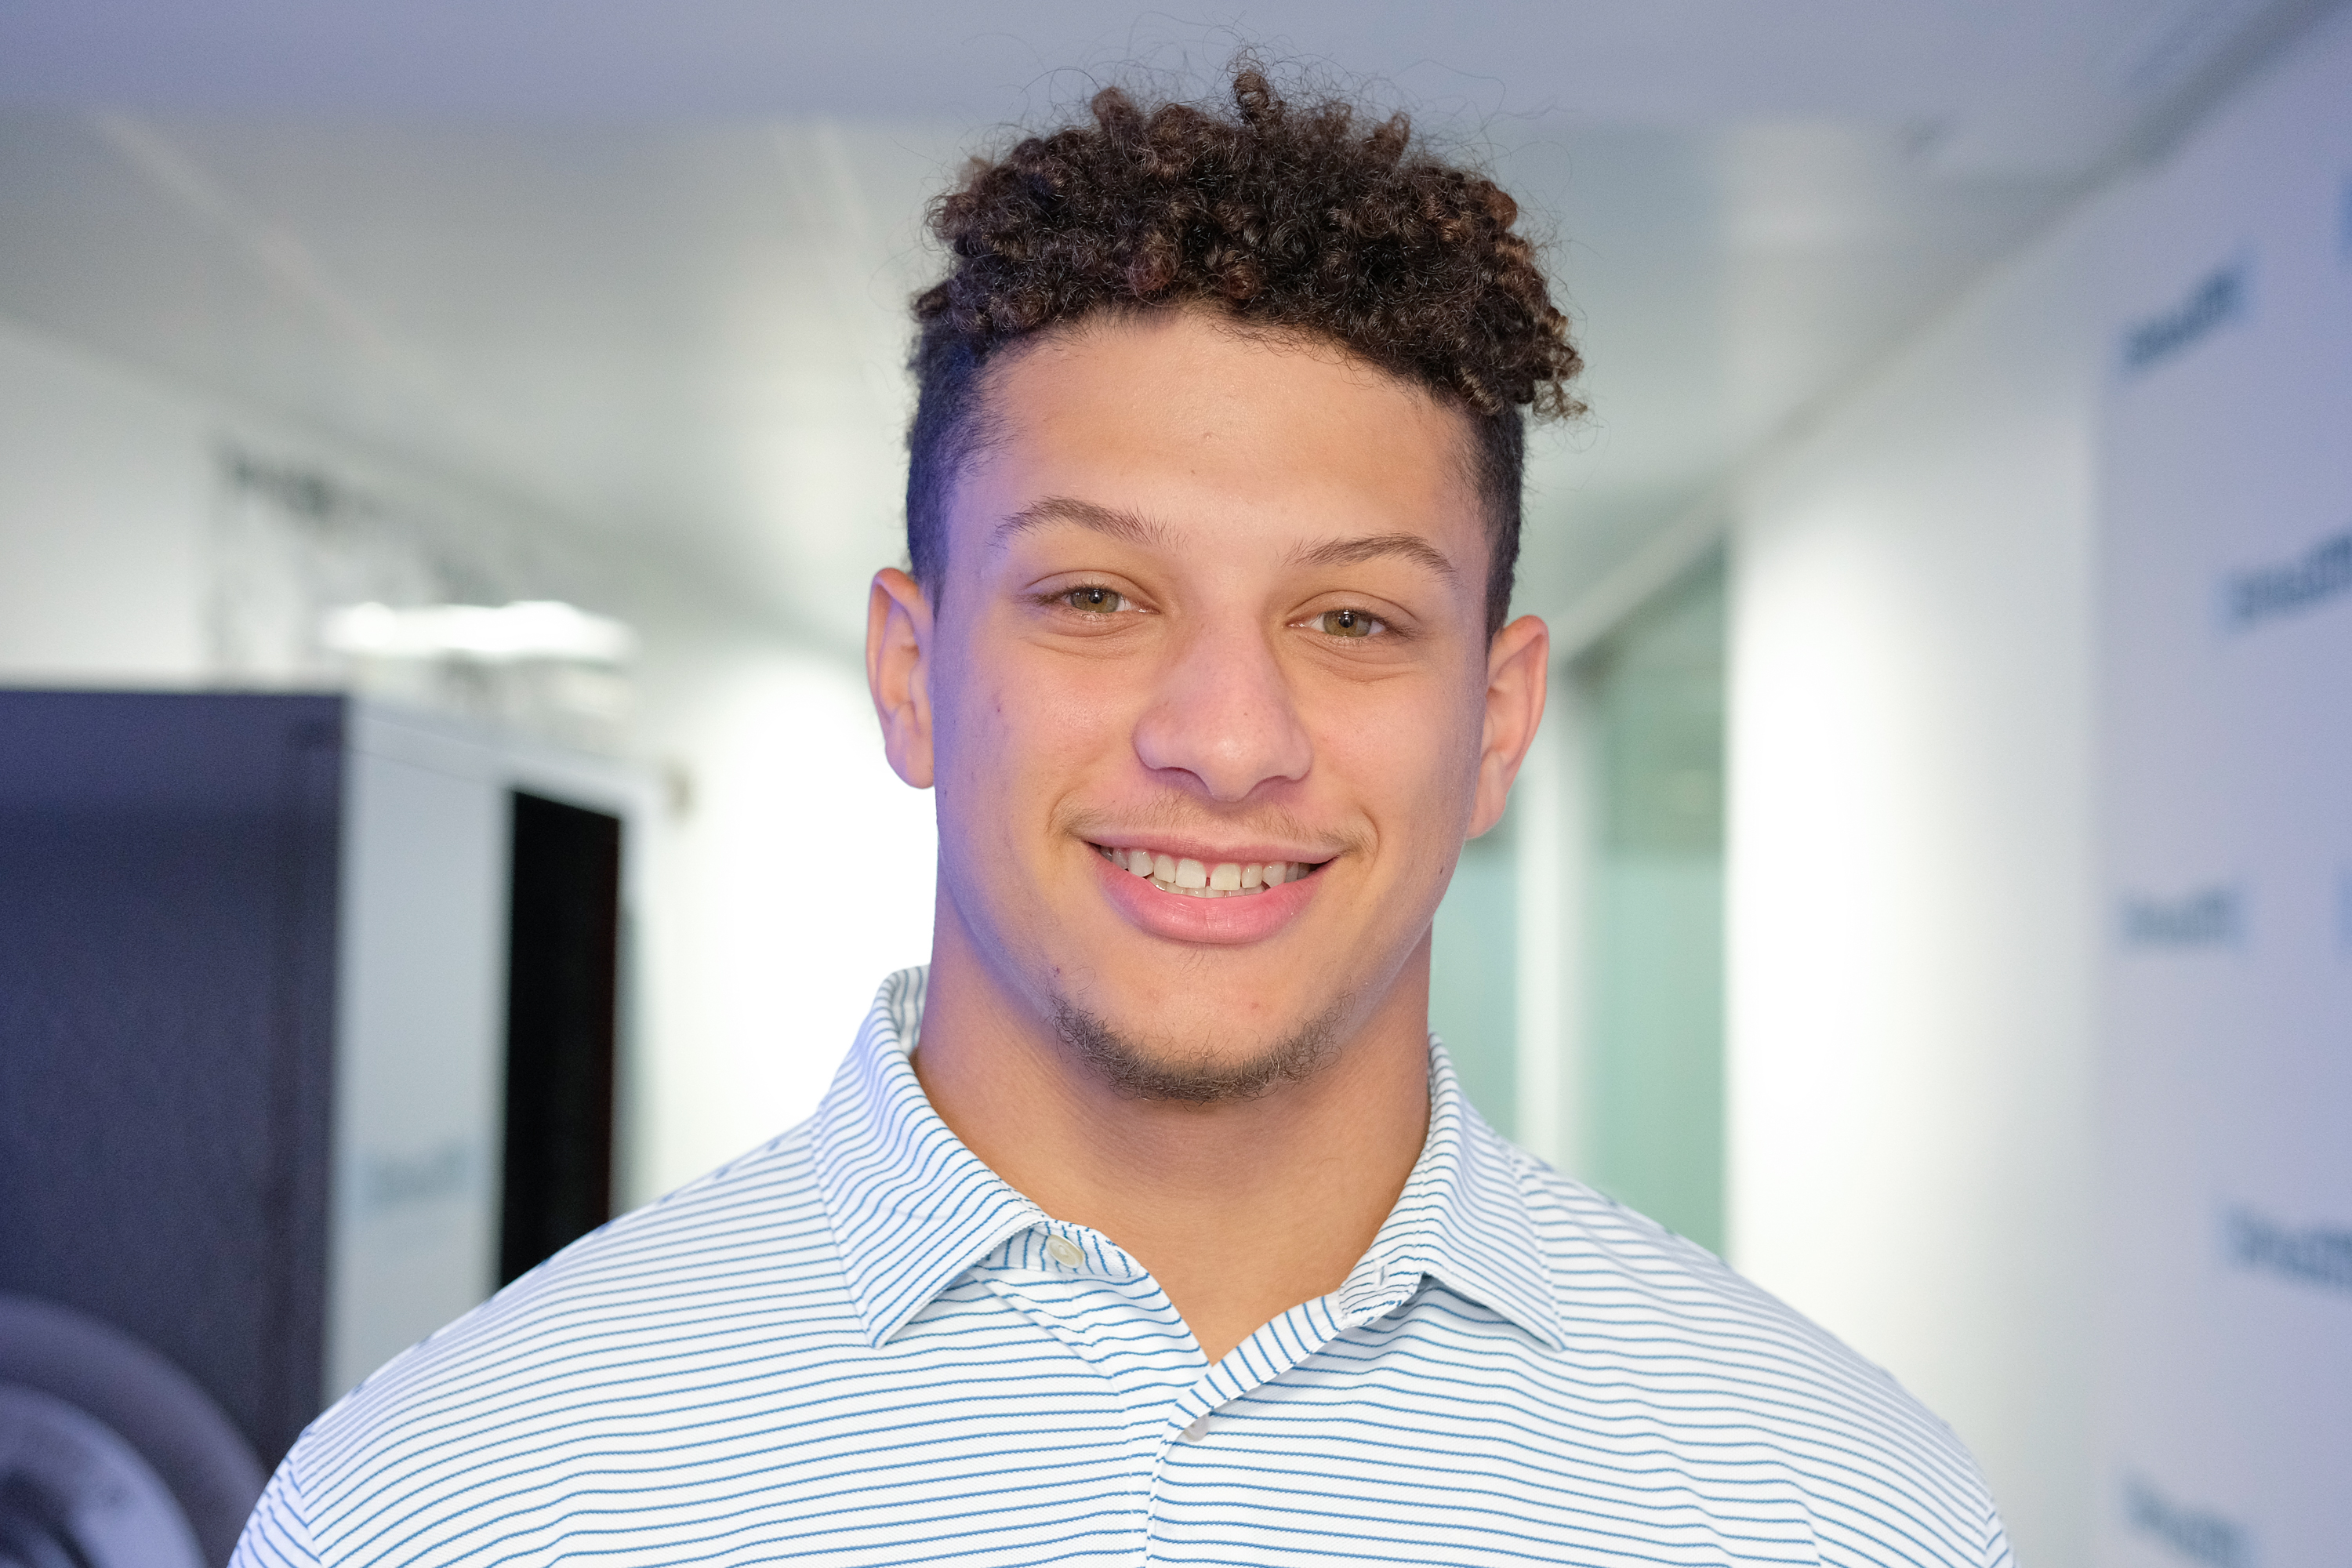 NFL's Patrick Mahomes Makes History as Youngest Sports Team Owner at 24